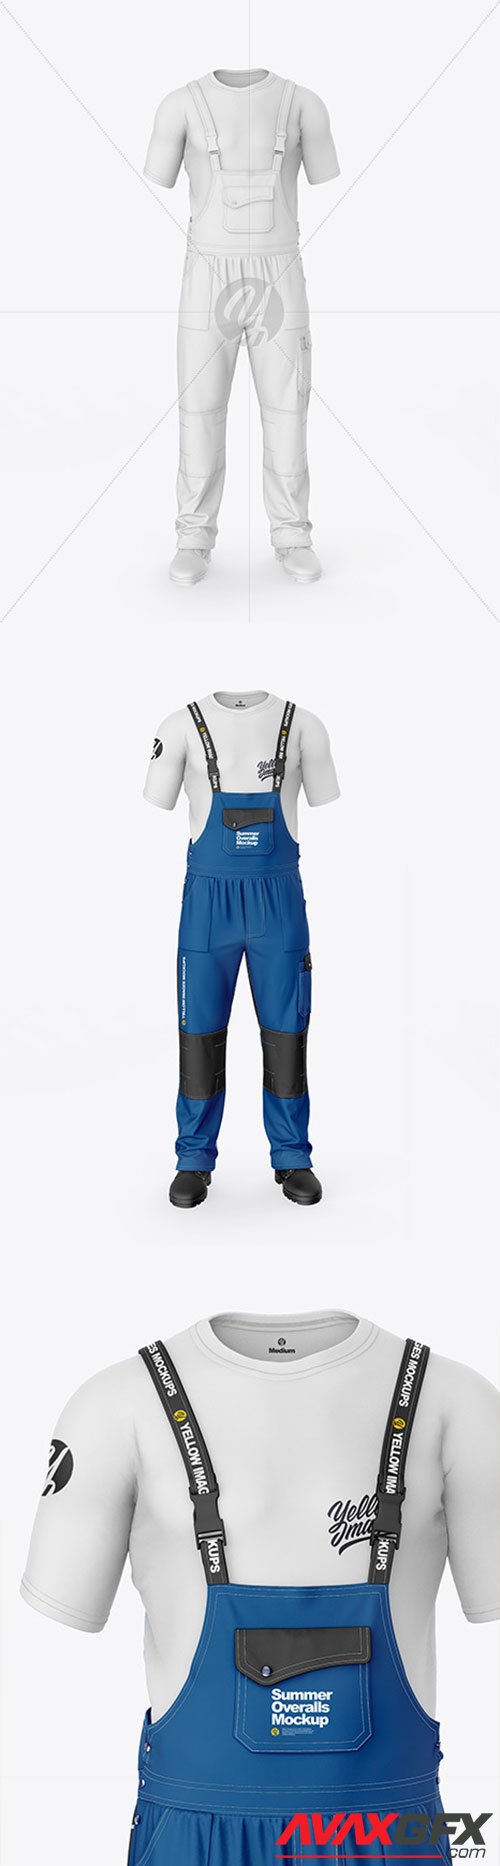 Summer Overalls Mockup – Front View 67889